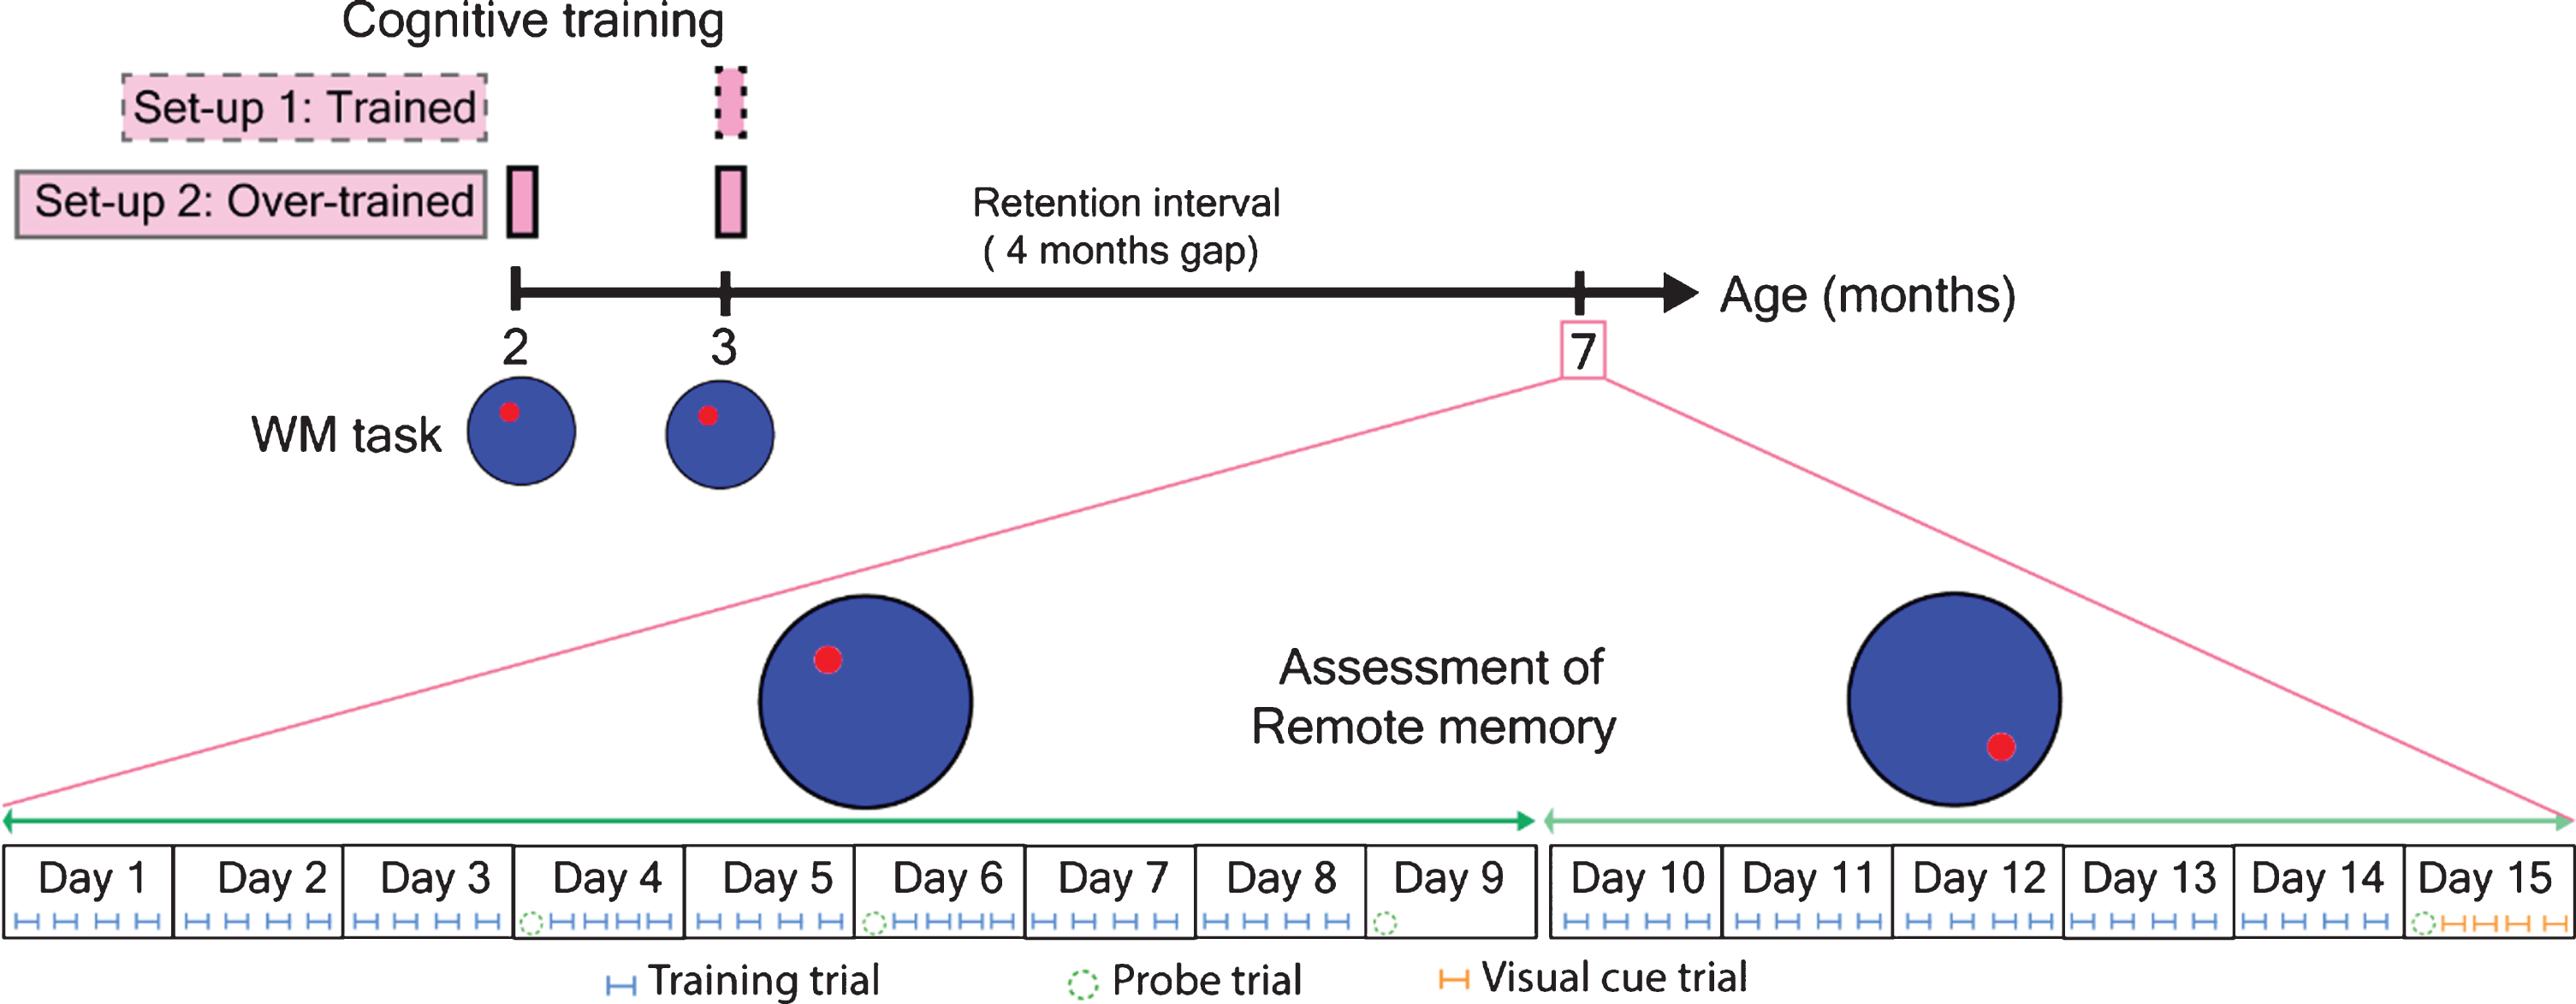 Experimental design for the assessment of remote spatial memory using WM relearning and WM reversal task. Red circle indicated the platform position for normal WM task and WM reversal task.